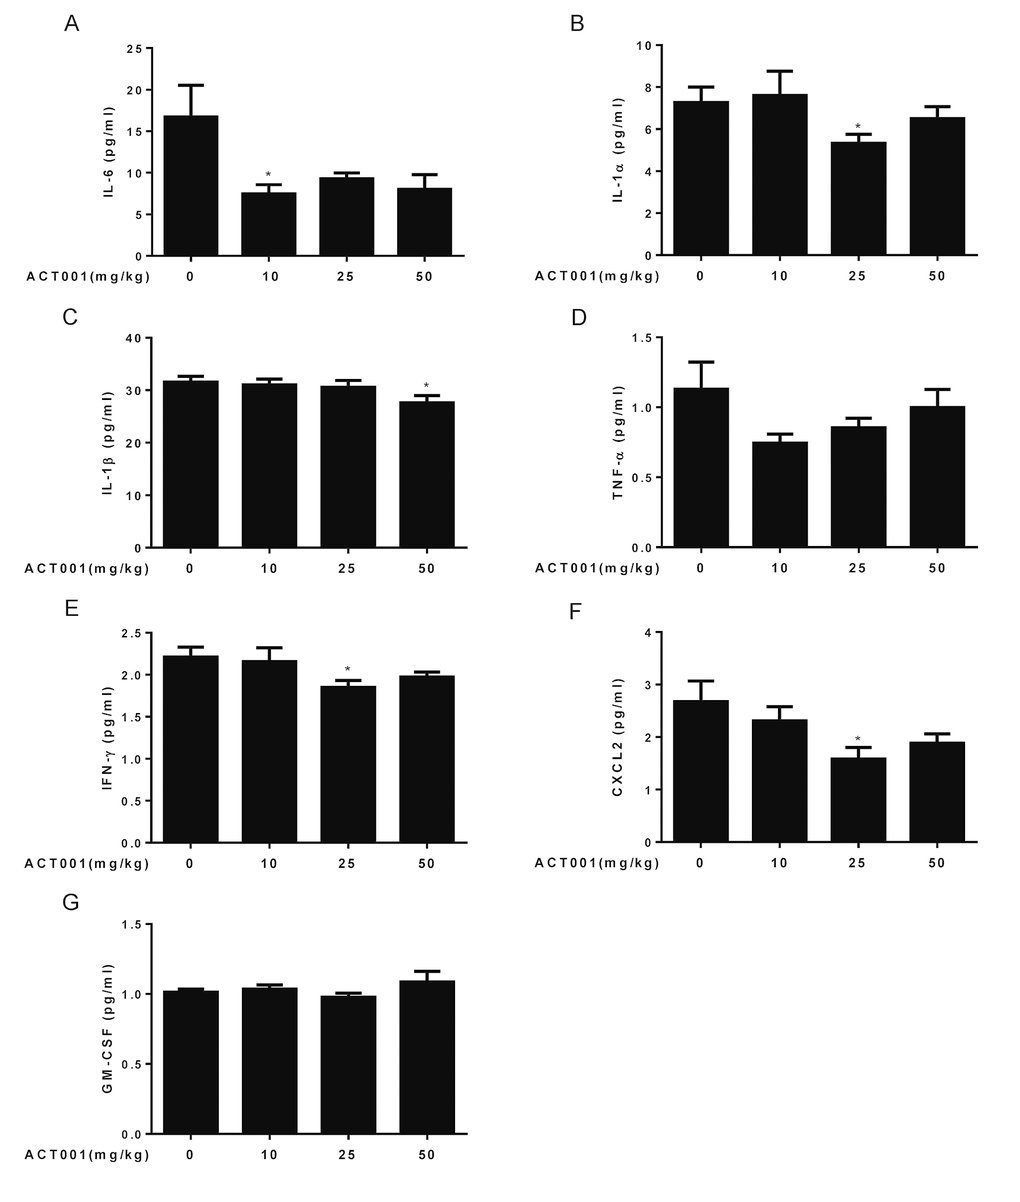 DMAMCL treatment represses age-related blood levels of inﬂammatory cytokines. The blood levels of seven inﬂammatory cytokines, including (A) IL-6, (B) IL-1α, (C) IL-1β, (D) TNF-α, (E) IFN-γ, (F) CXCL2, and (G) GM-CSF were measured using a mouse magnetic Luminex screening assay (n=10). Data are represented as the mean ± SEM. *P 